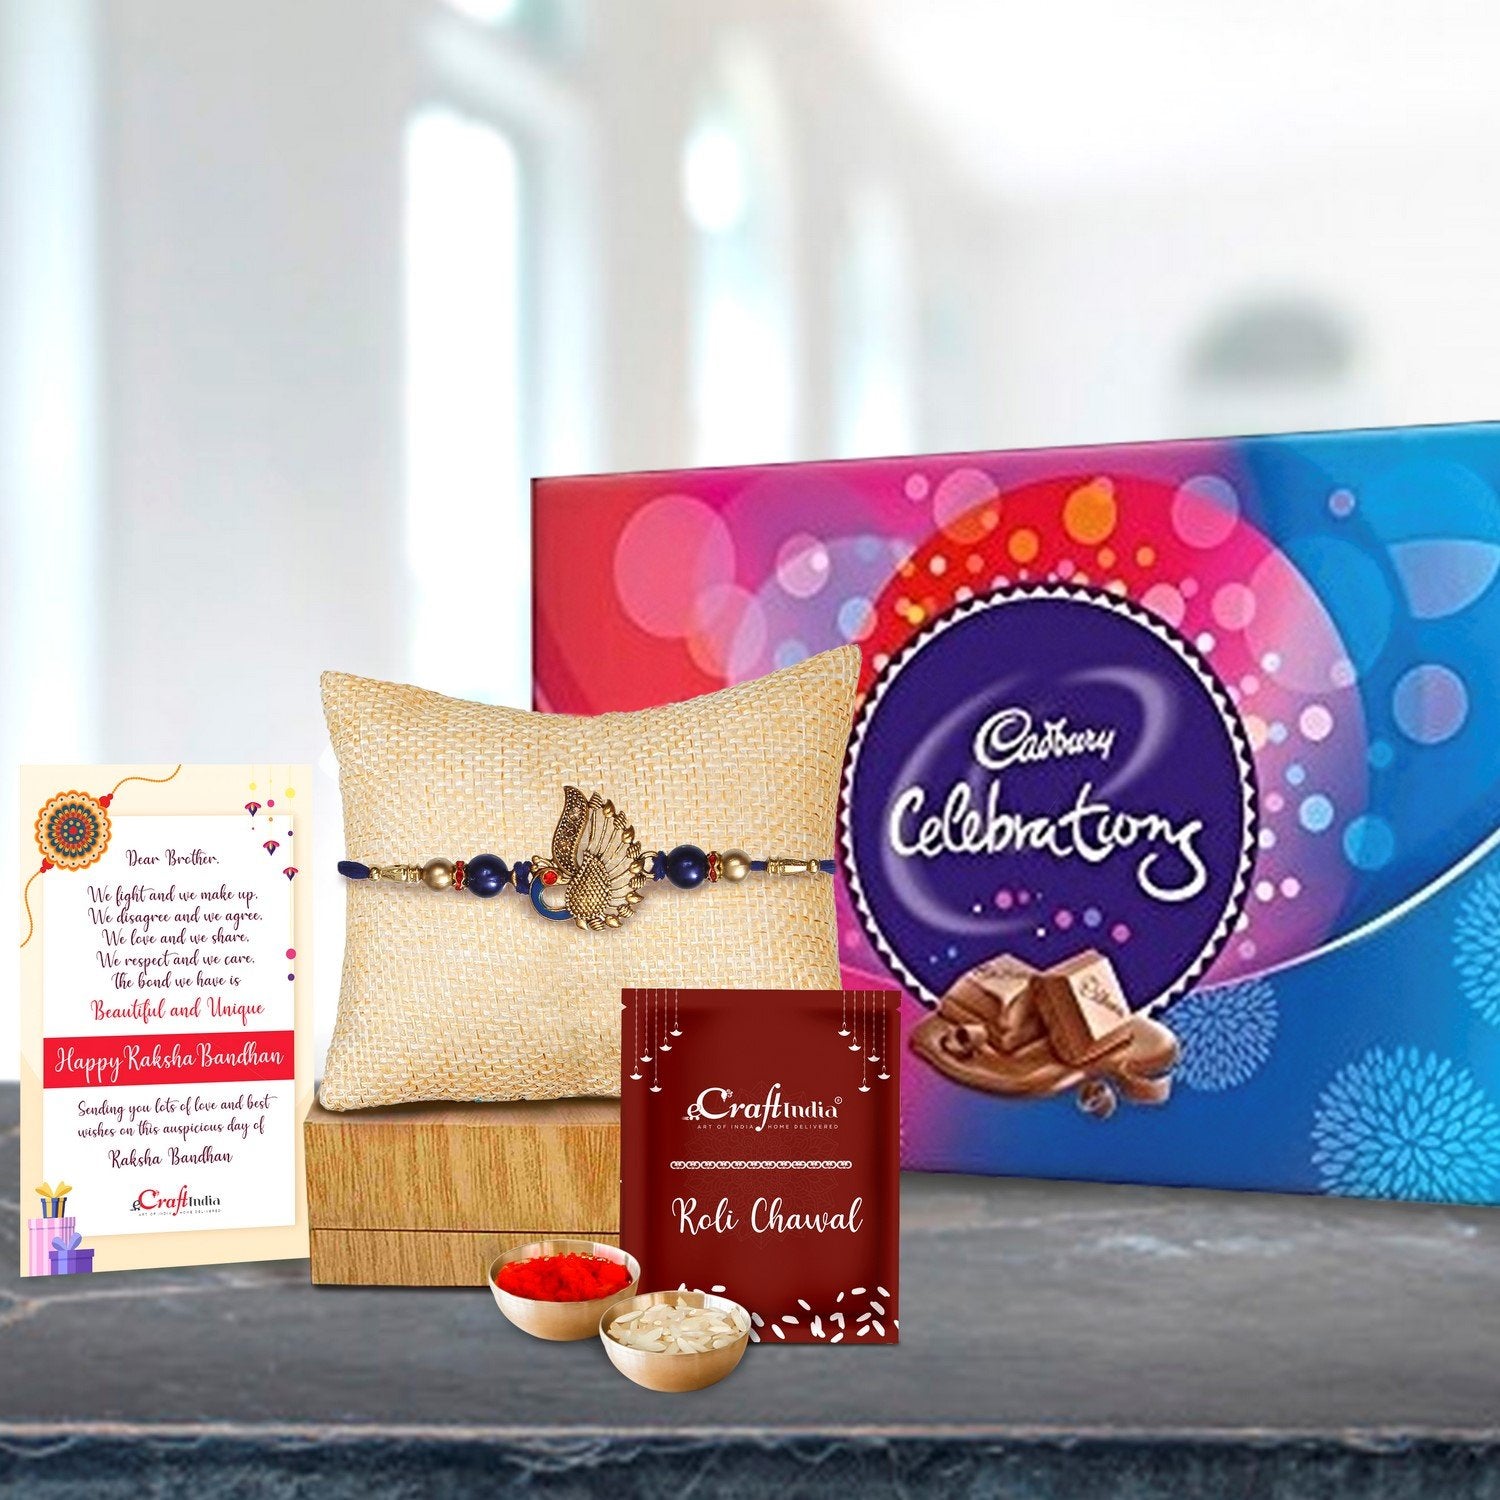 Designer Peacock Rakhi with Cadbury Celebrations Gift Pack of 7 Assorted Chocolates and Roli Chawal Pack, Best Wishes Greeting Card